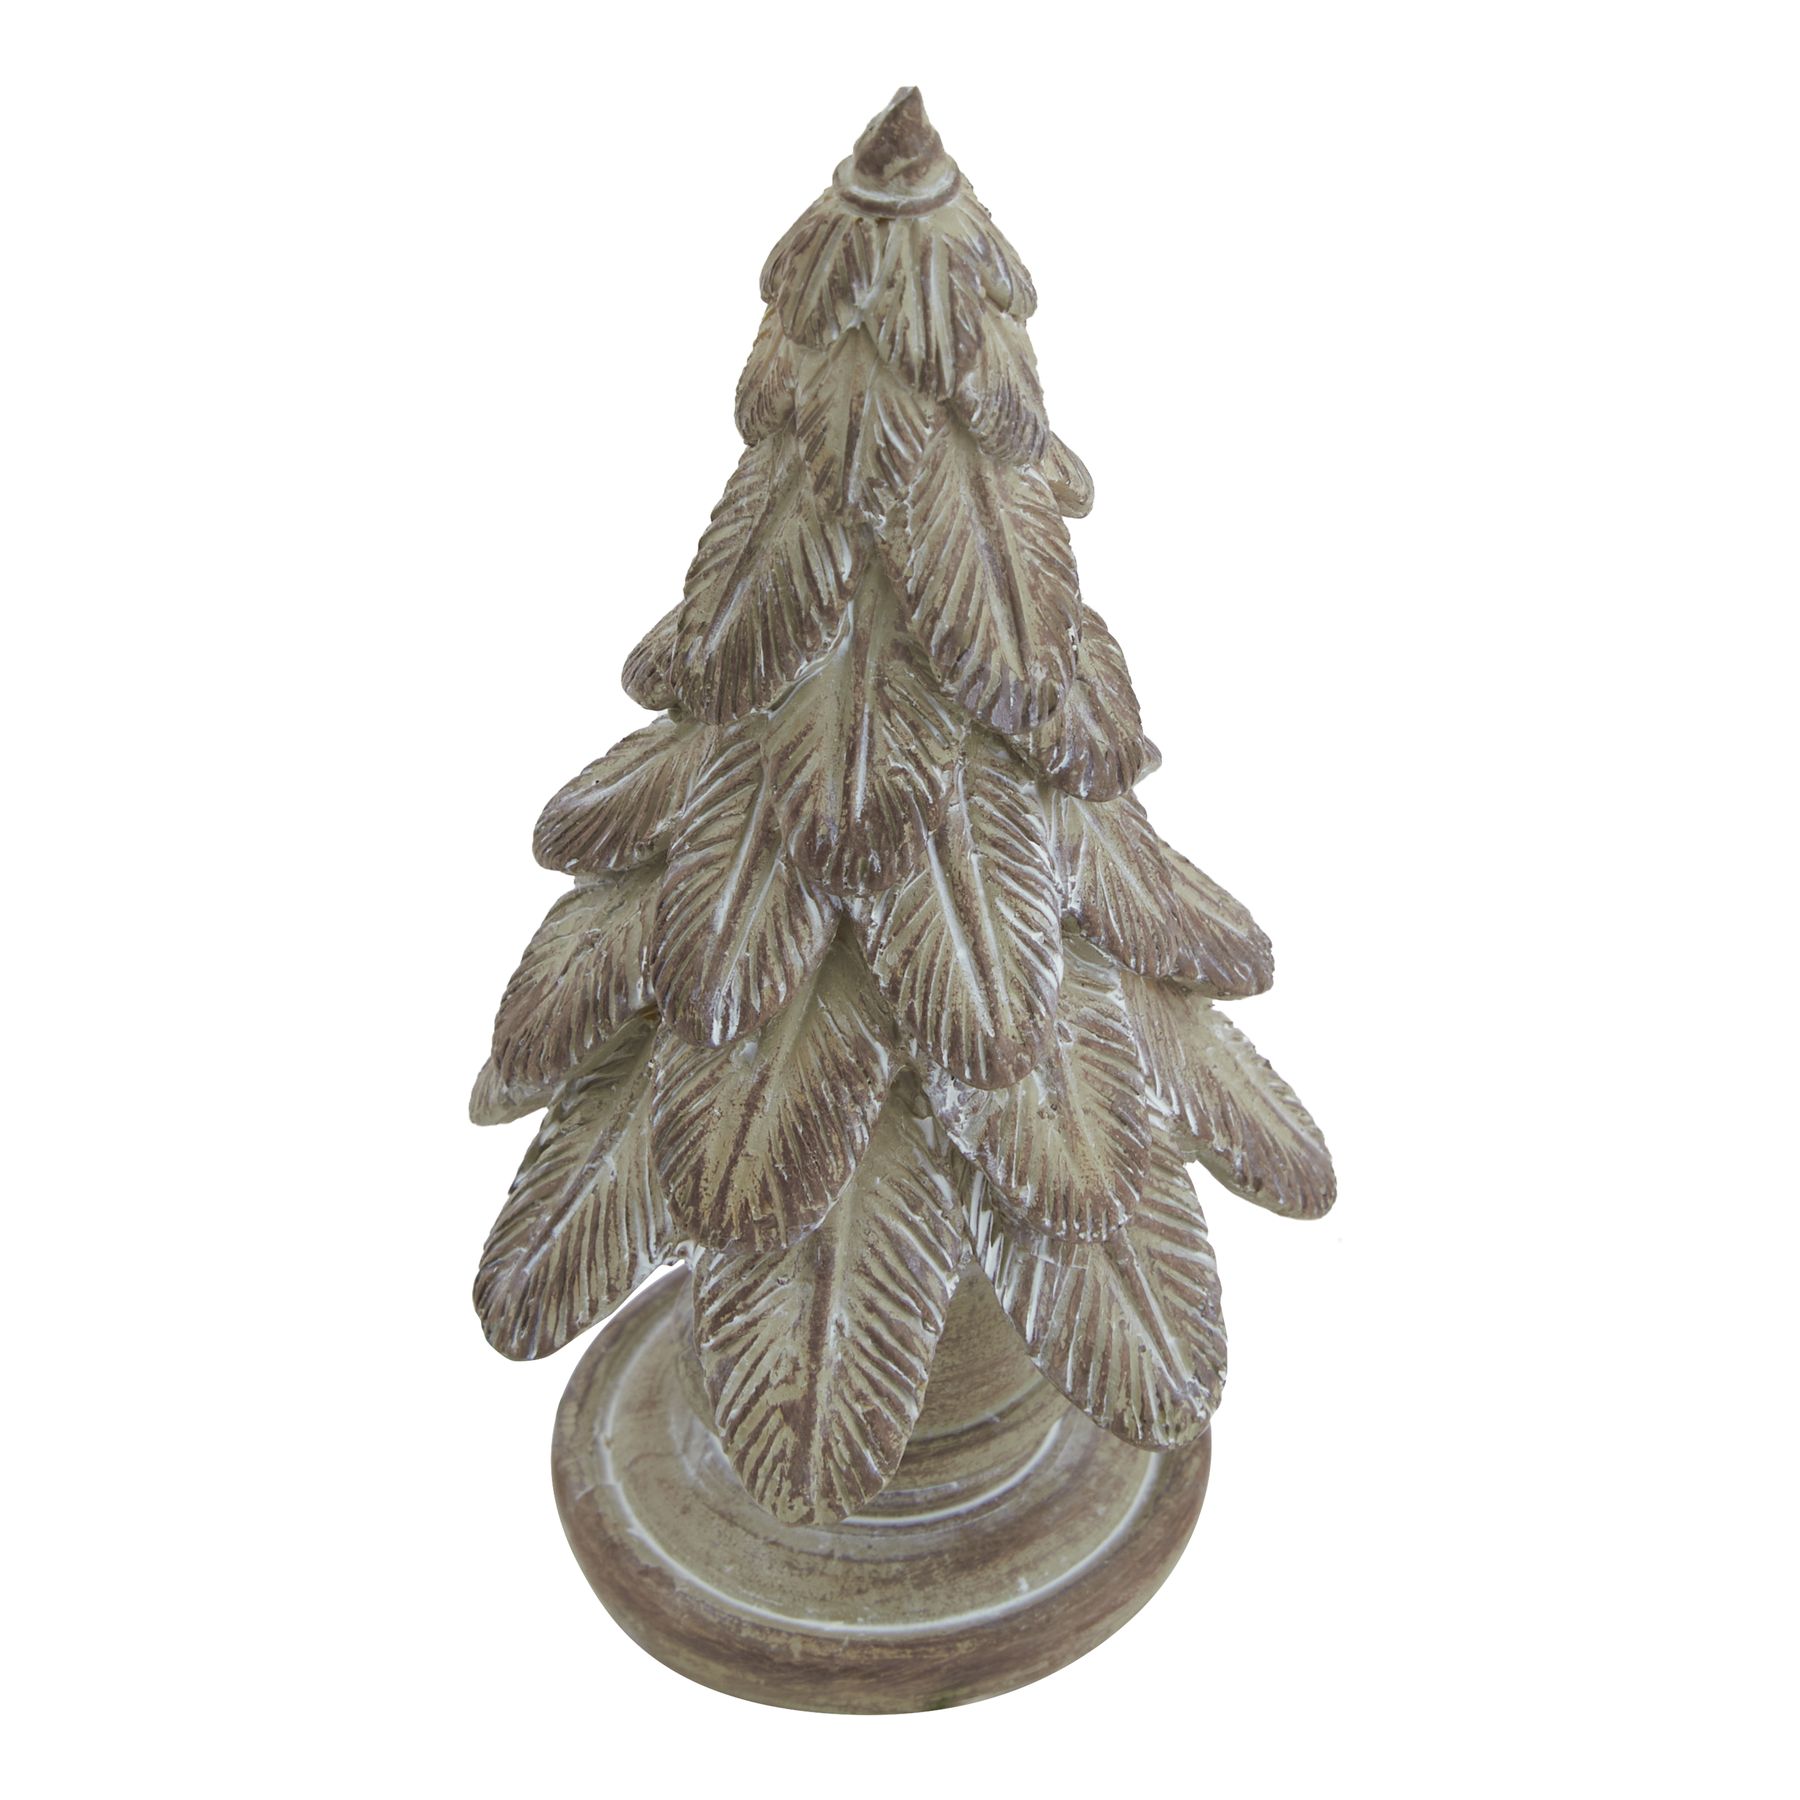 Small Spruce Tree Sculpture - Image 2